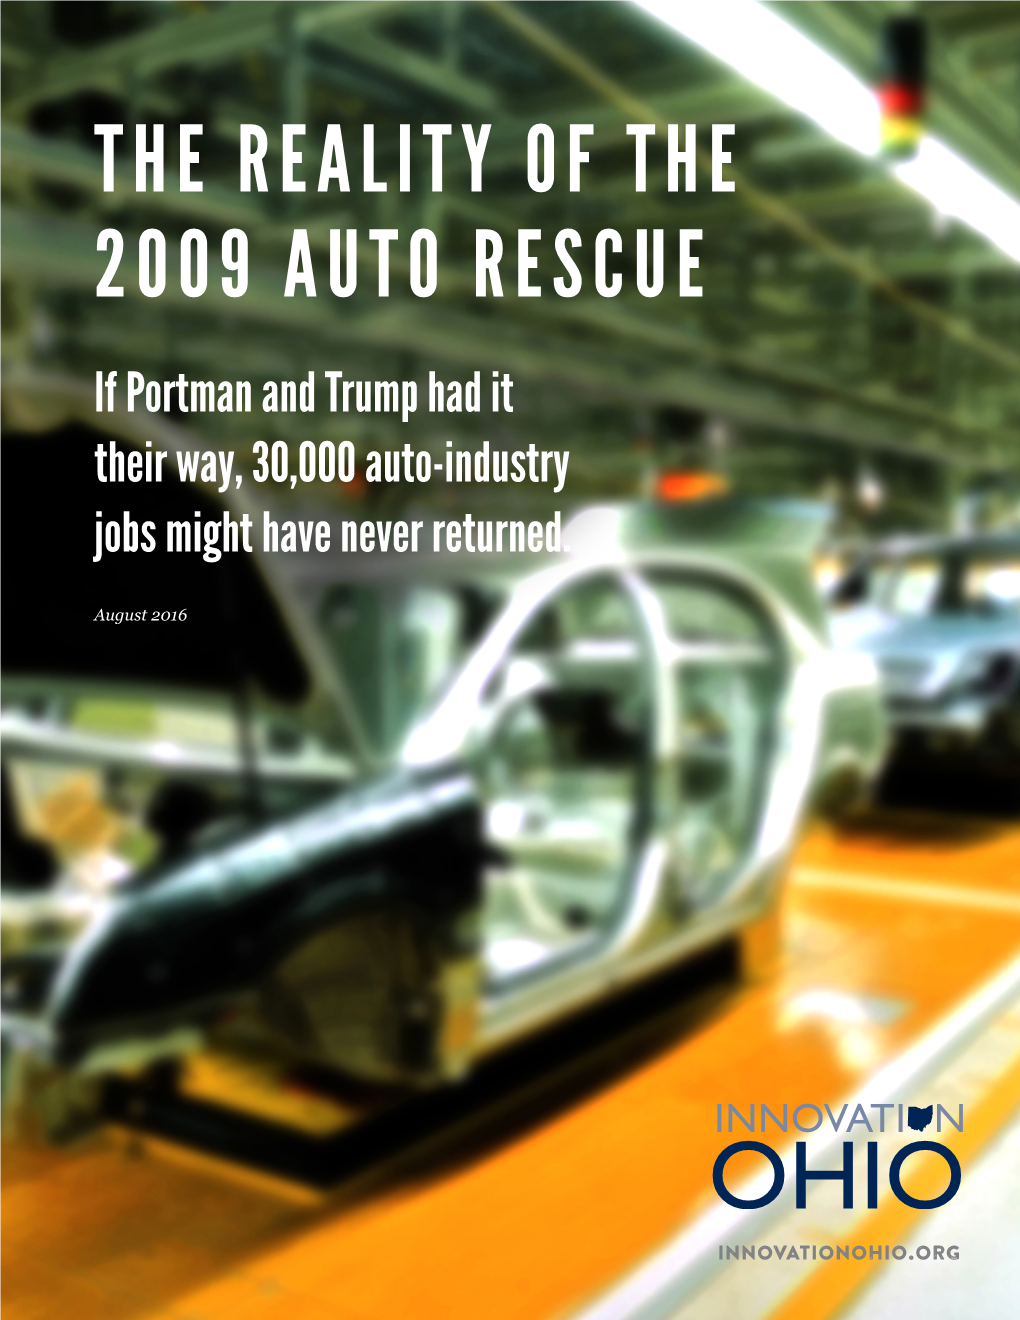 The Reality of the 2009 Auto Rescue